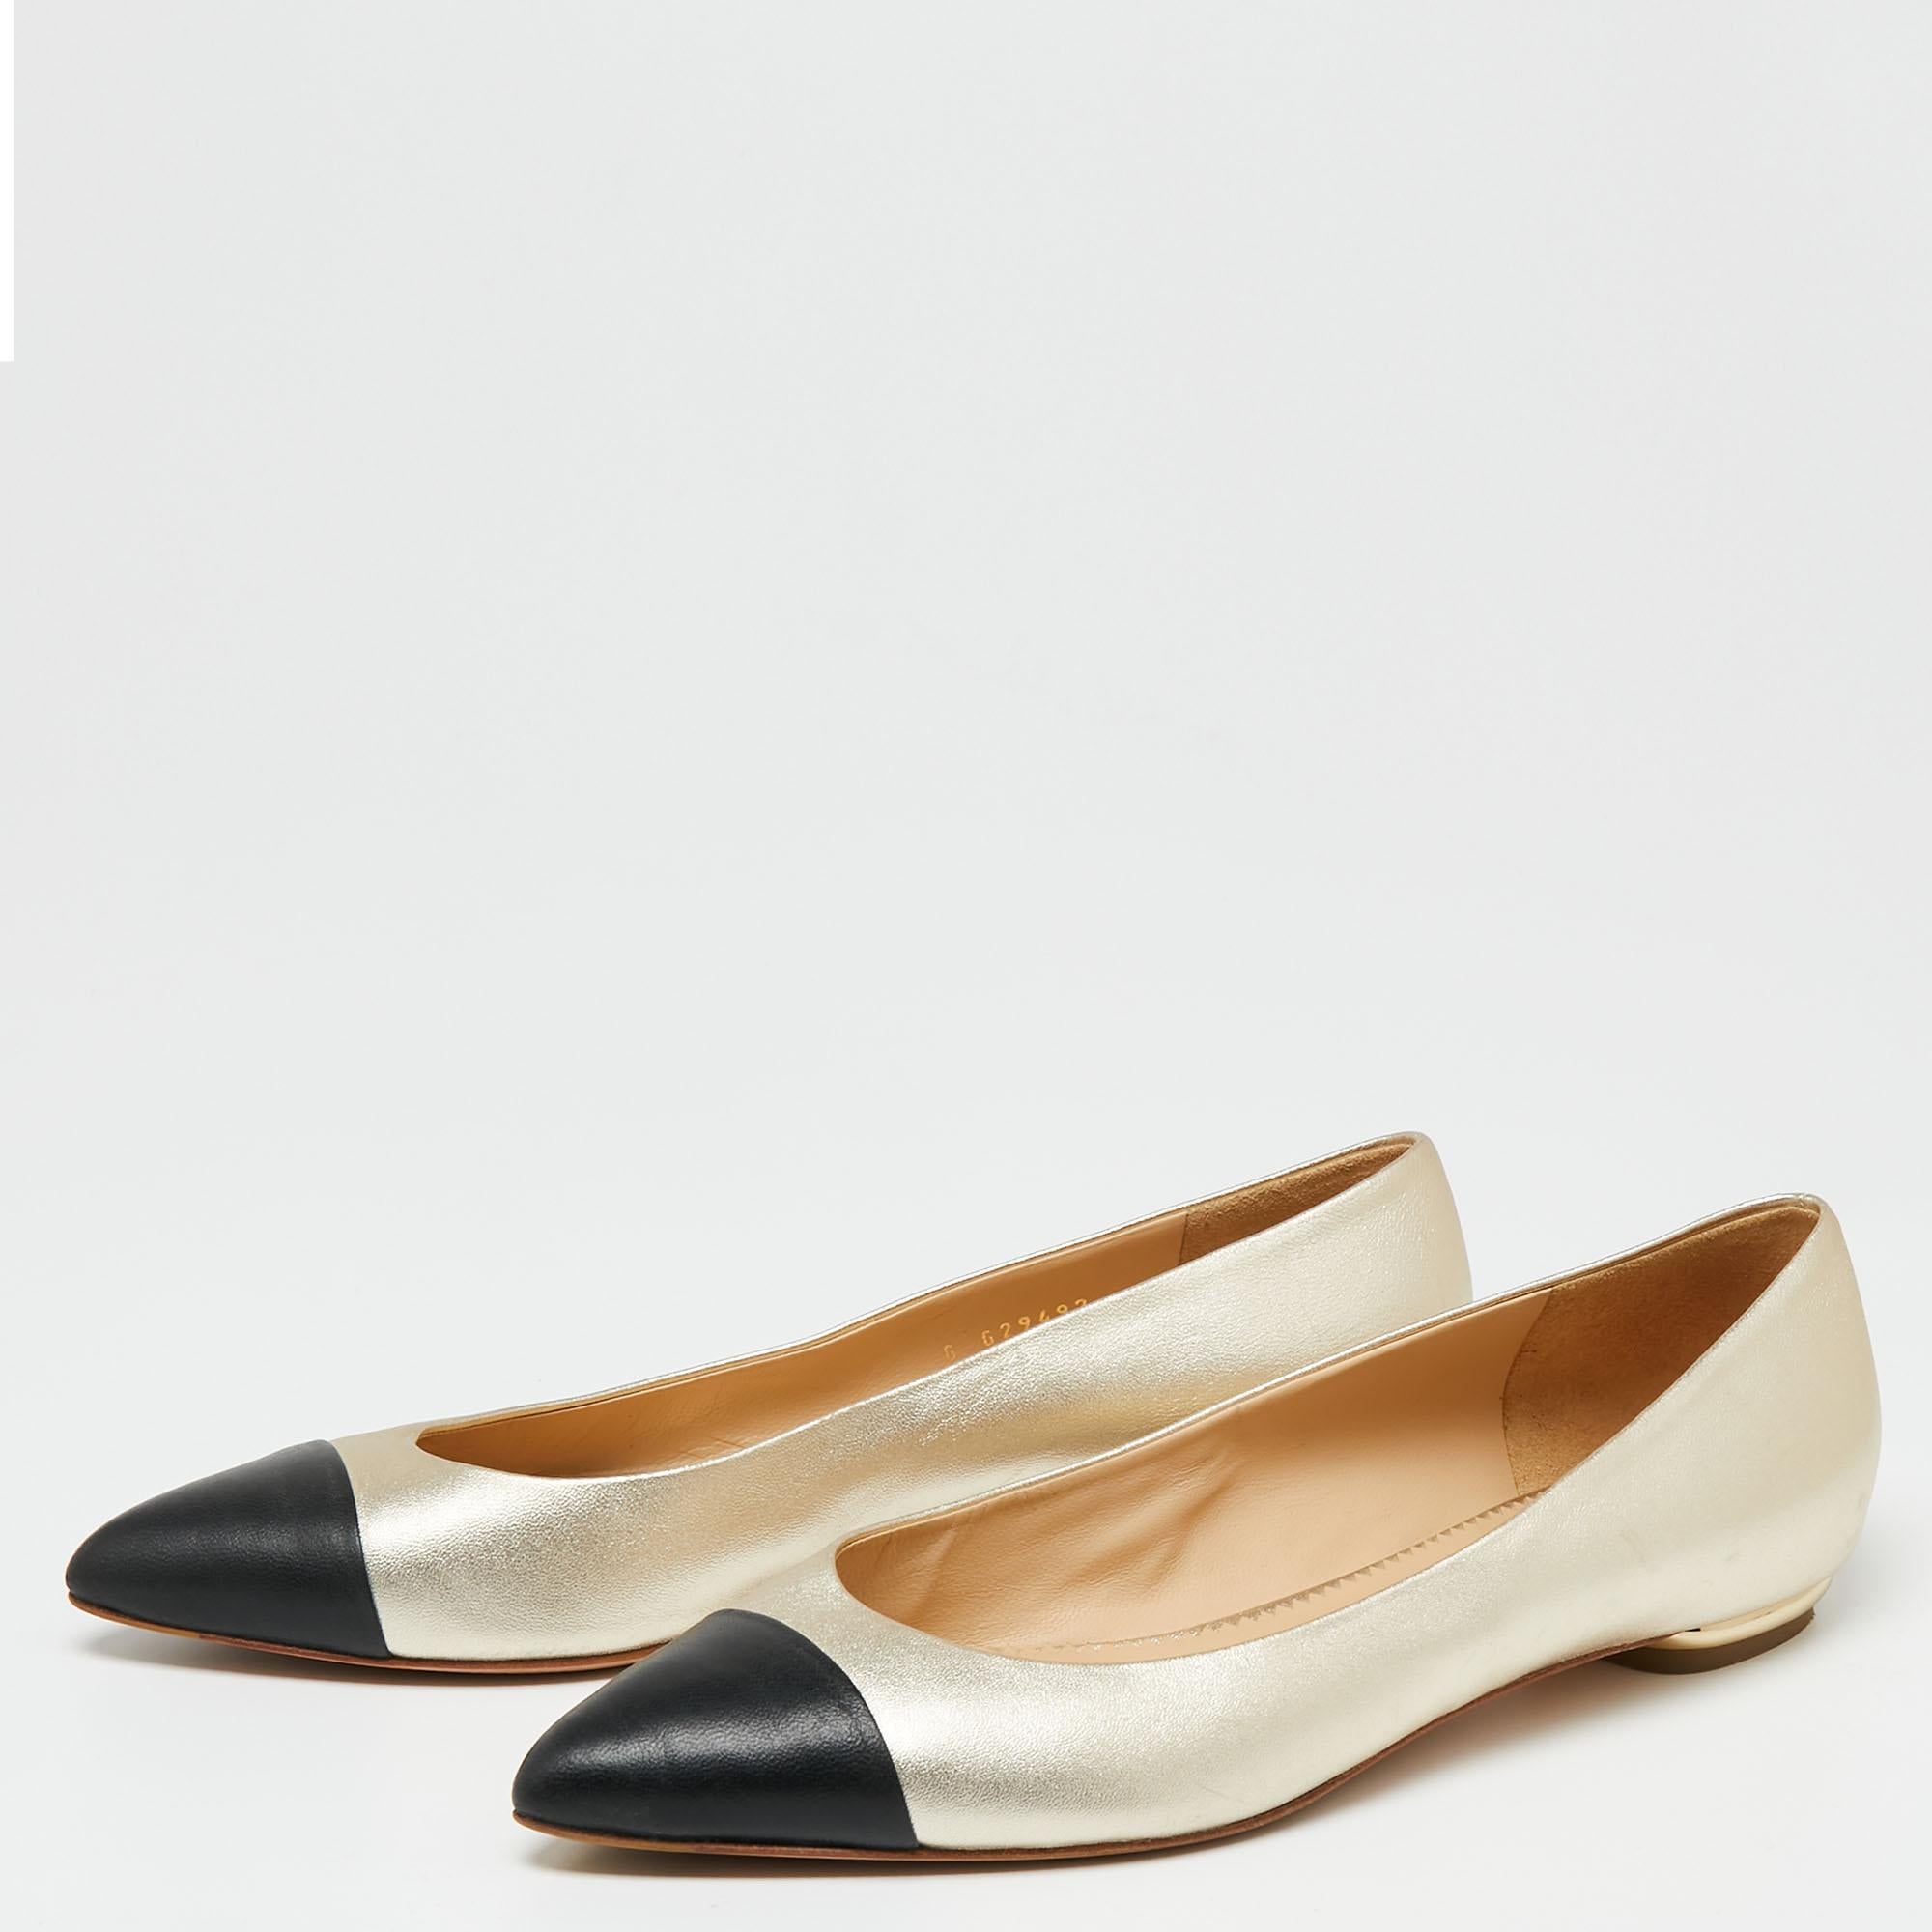 Feel your best every time you wear these Chanel ballet flats. The flats are crafted from gold leather and styled with black pointed cap toes and gold-tone heels. They are complete with comfortable leather insoles and durable outsoles.